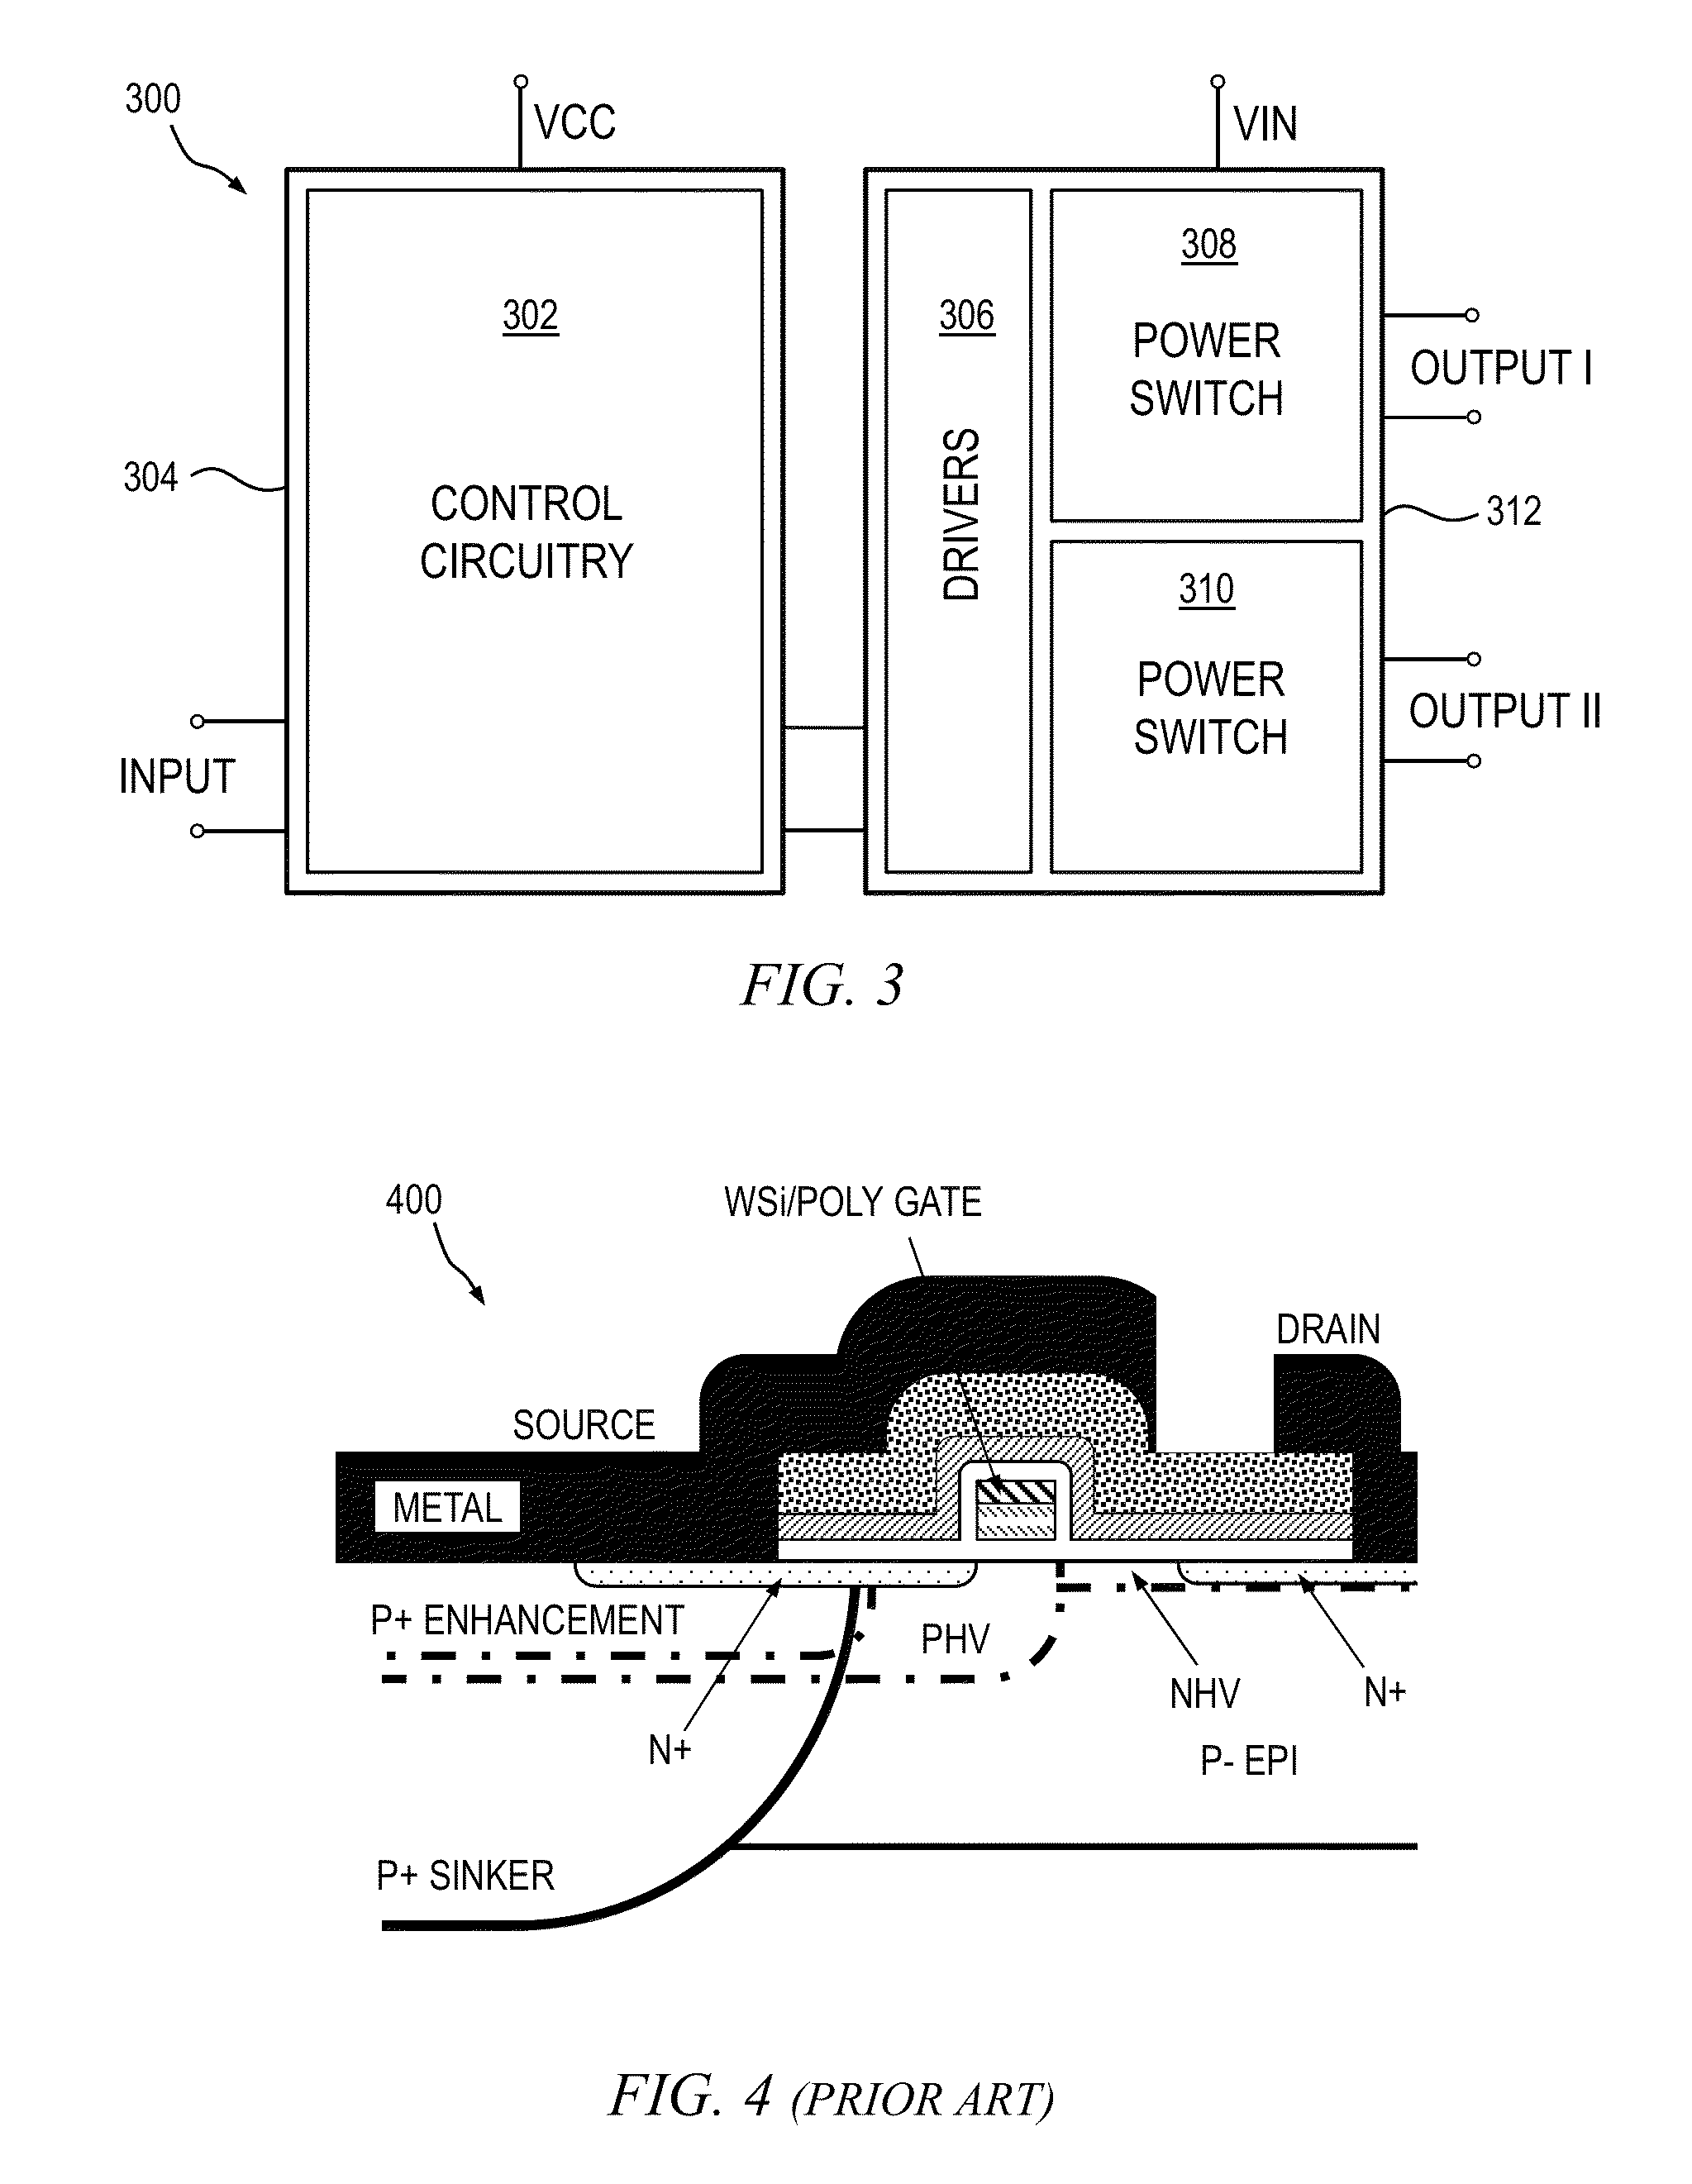 Power device integration on a common substrate